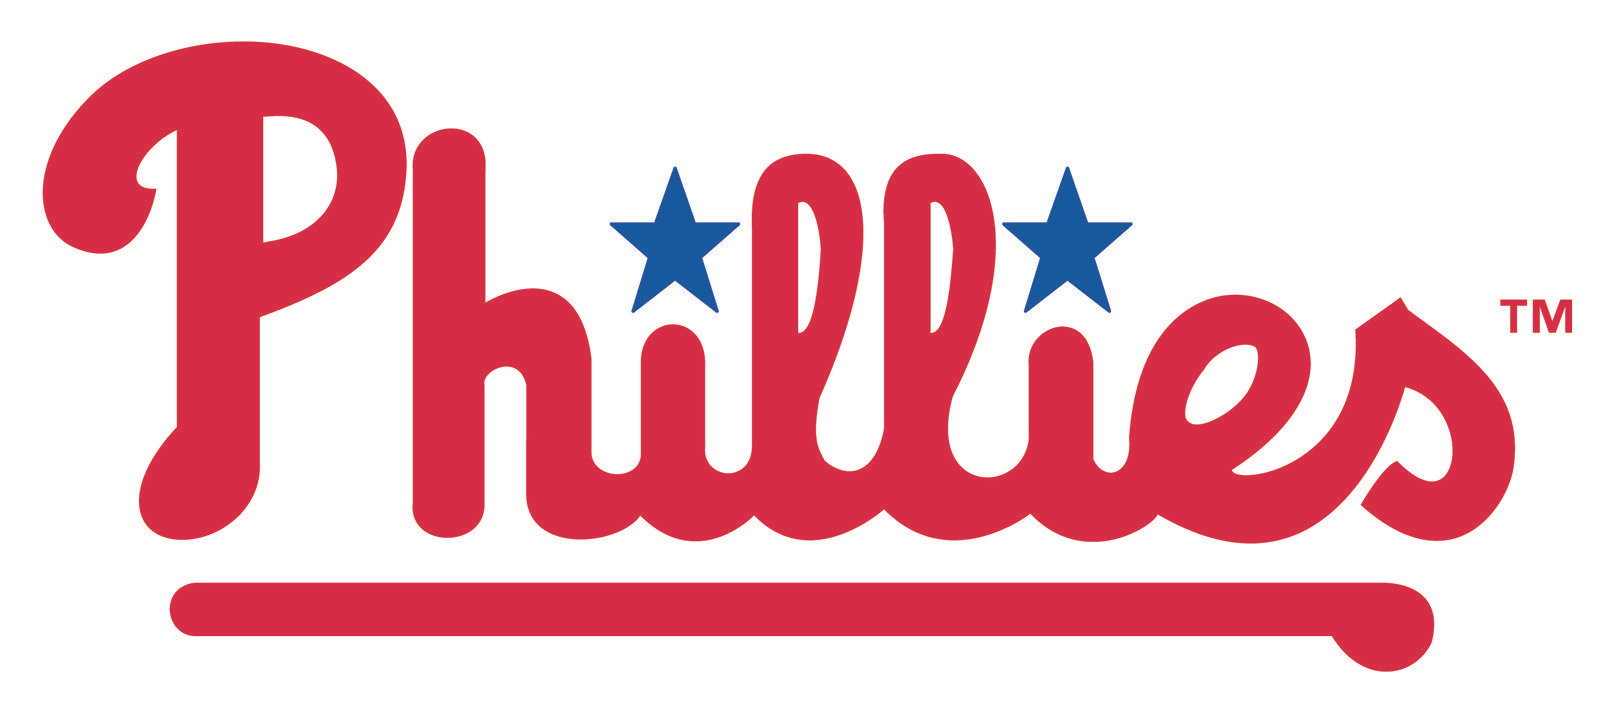 Different Phillies Logo - Philadelphia Phillies Logo, Phillies Symbol, Meaning, History and ...